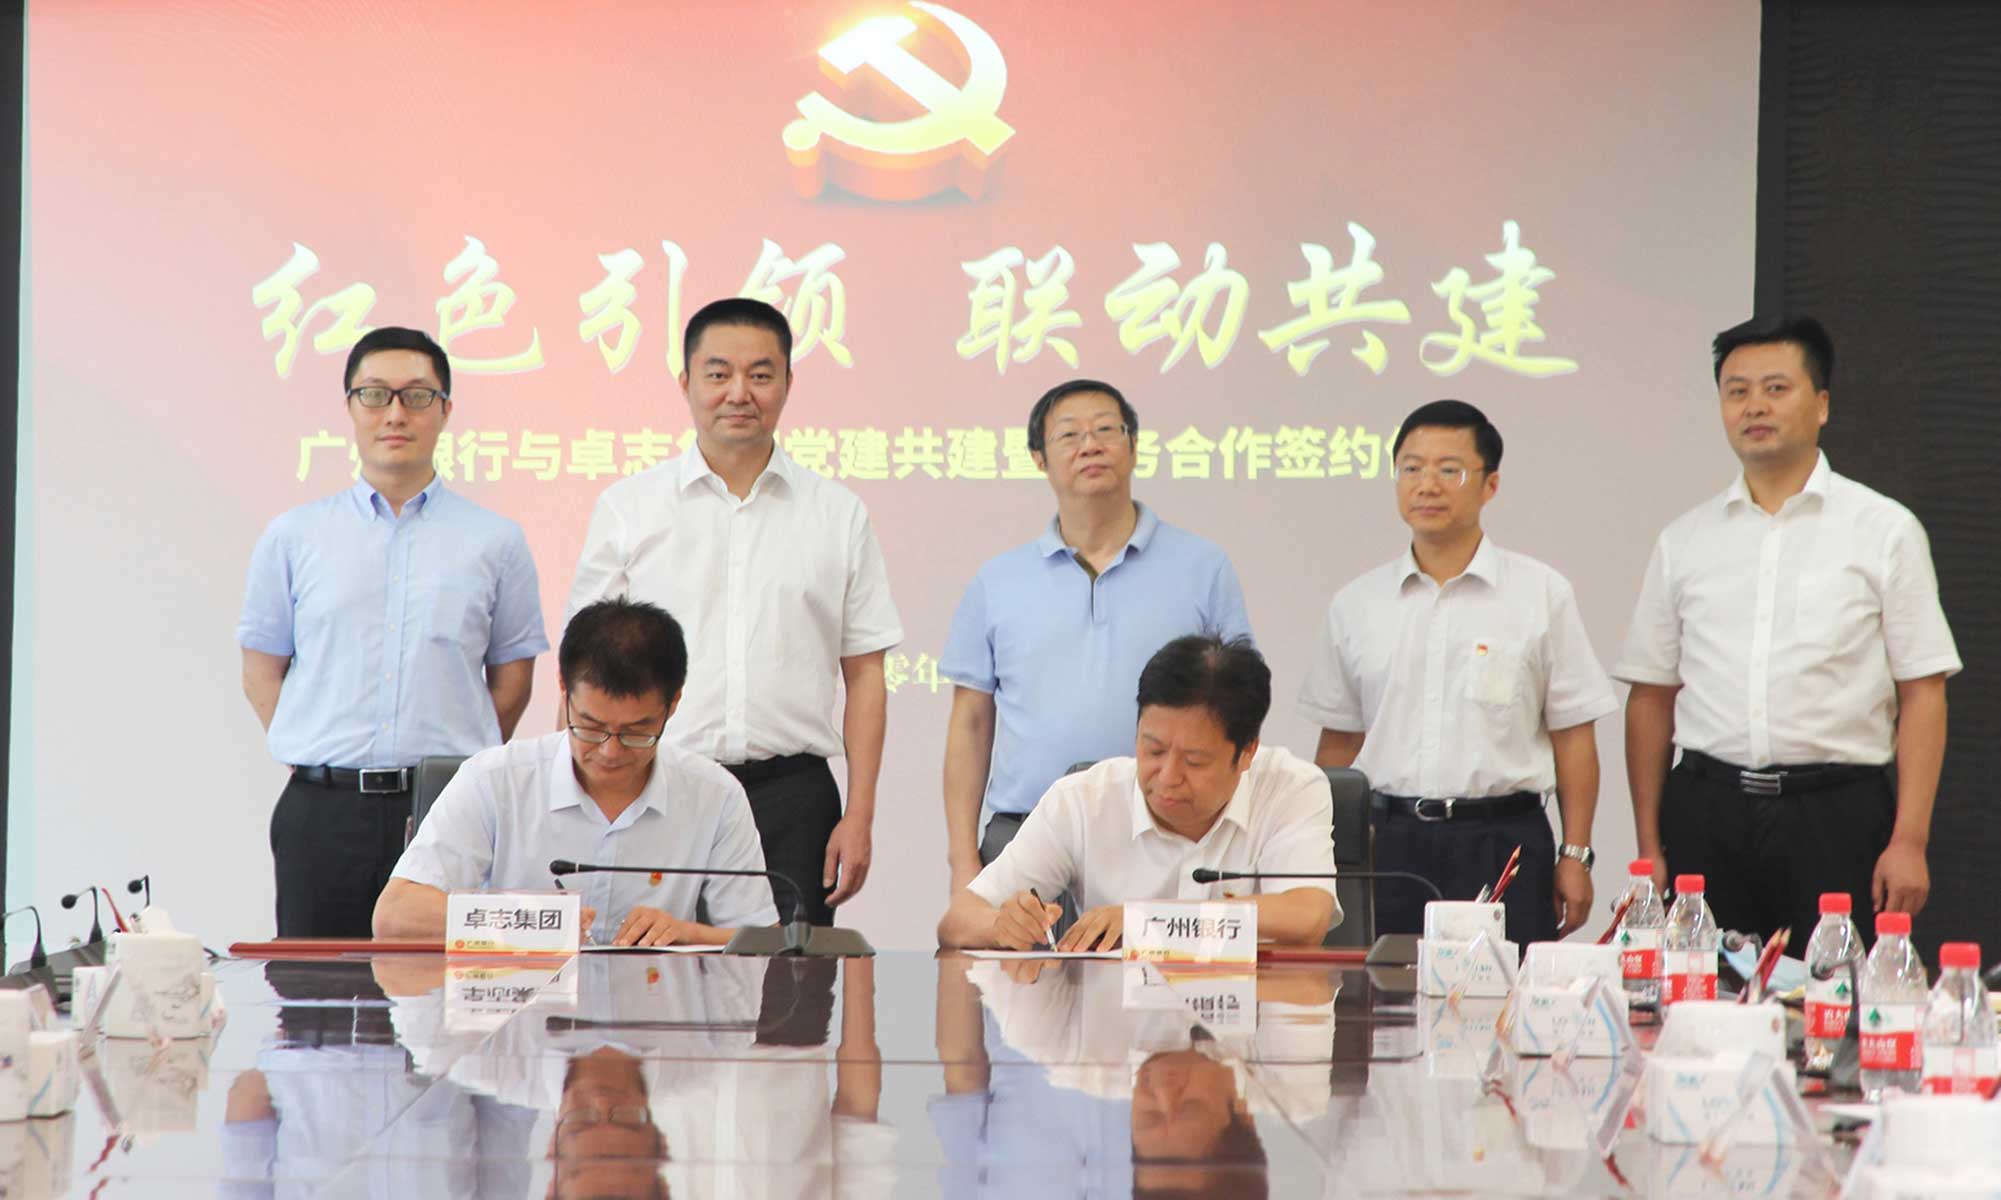 Yu Chonggang, Secretary of Top Ideal CPC Branch, signed the agreement on behalf of the company with the Bank of Guangzhou on the co-building of CPC branch organizations